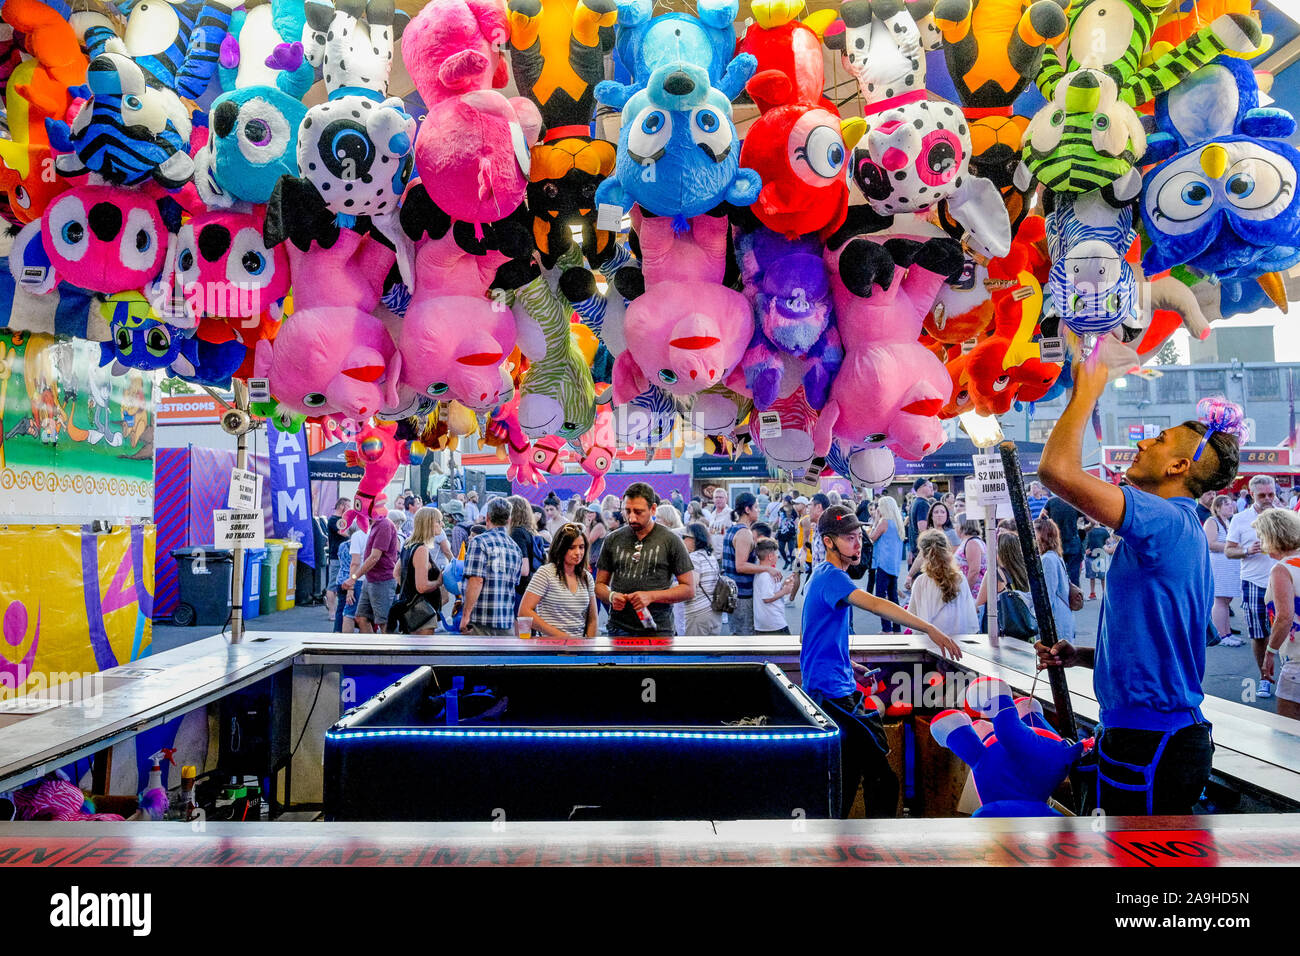 Stuffed animal prizes at game booth, Playland, Hastings Park, Vancouver,  British Columbia, Canada Stock Photo - Alamy